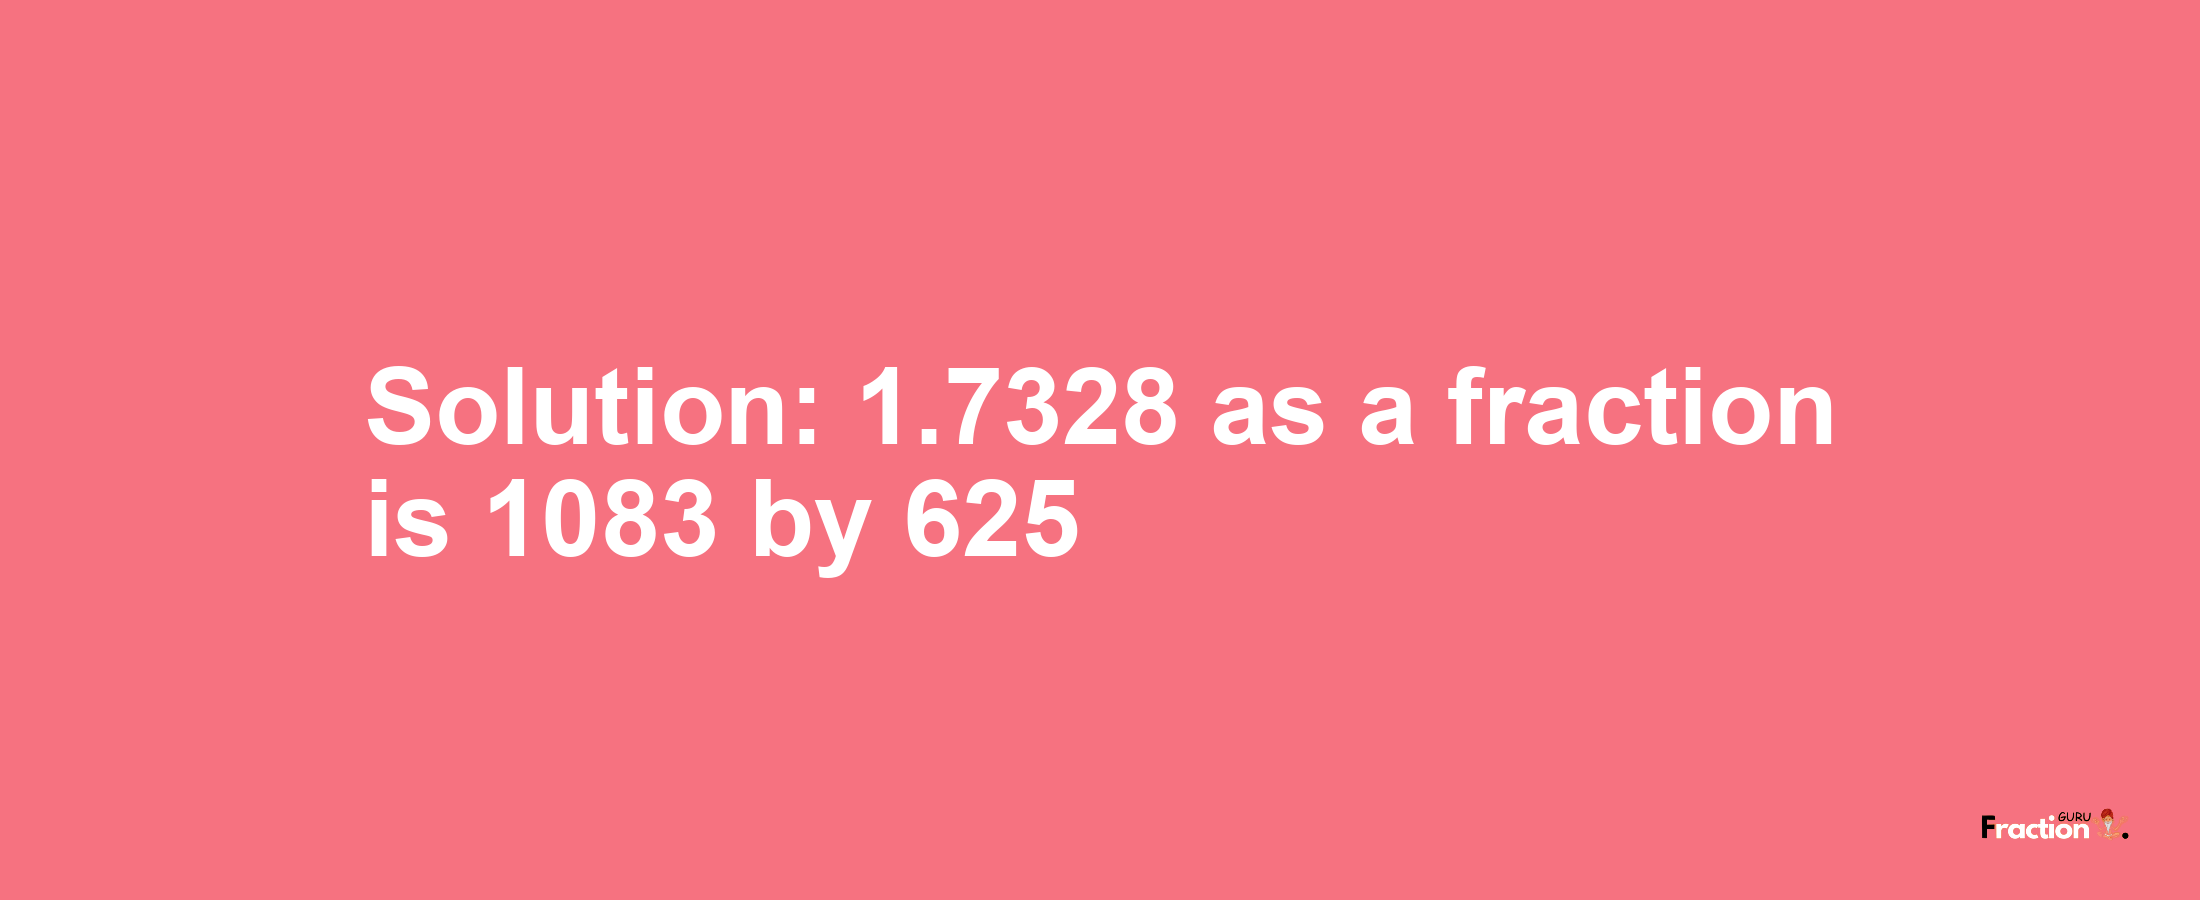 Solution:1.7328 as a fraction is 1083/625